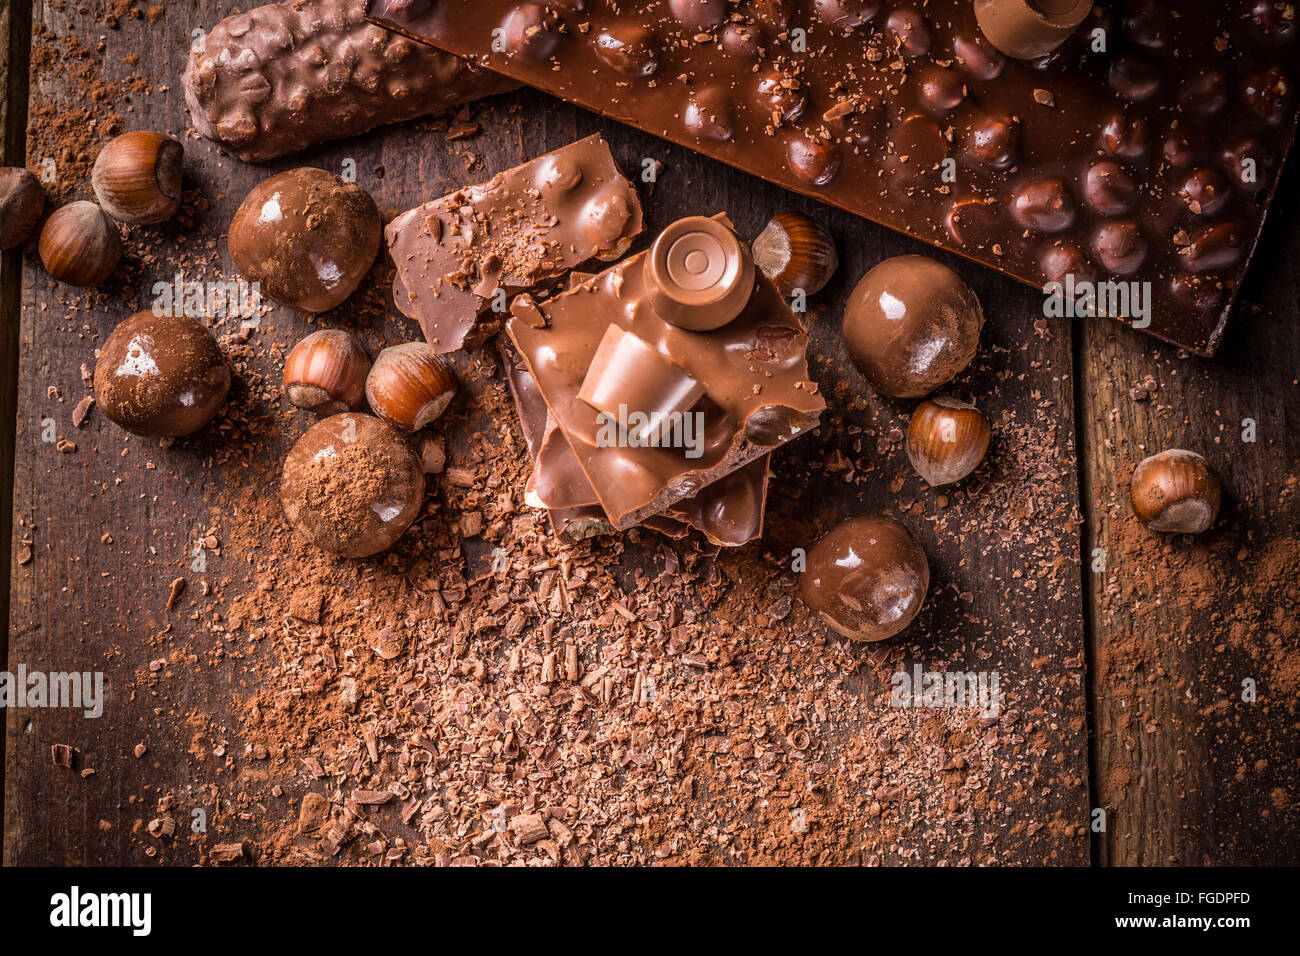 Assorted chocolate pralines and bars with filbert Stock Photo